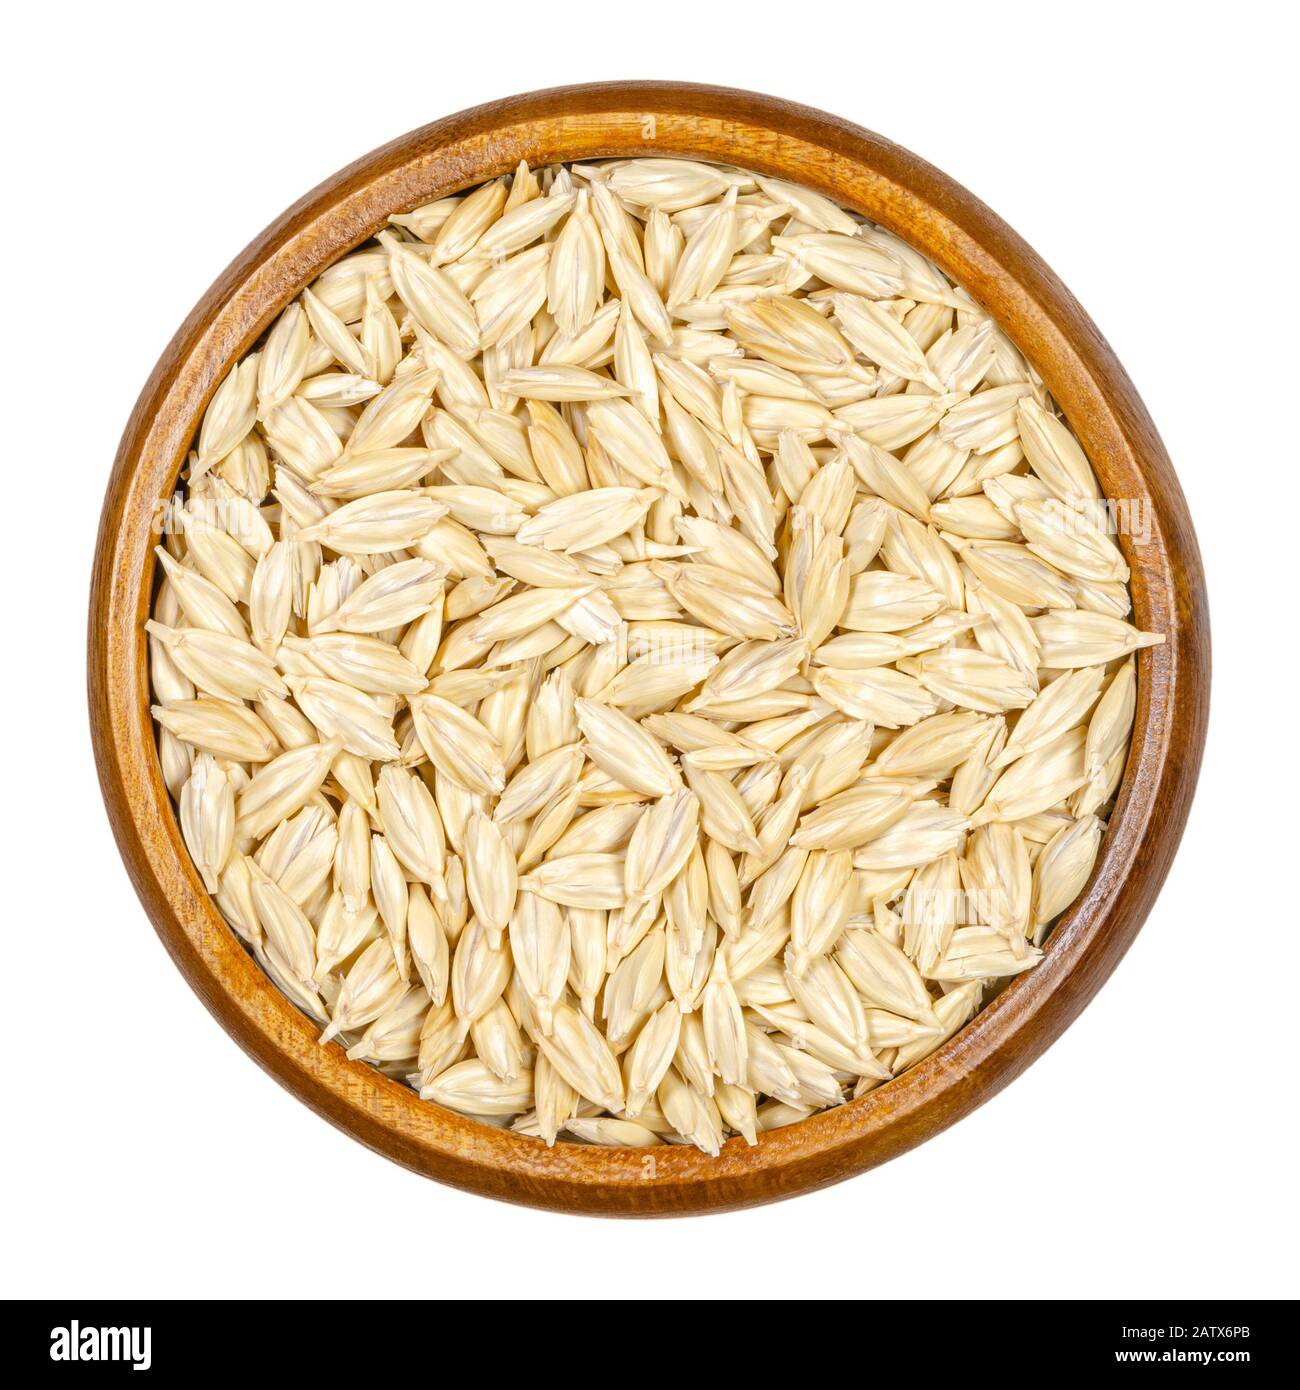 Spelt grains, seeds with outer husk in wooden bowl. Dinkel or hulled wheat, Triticum dicoccum. Cereal grain. European relict crop, used as health food Stock Photo